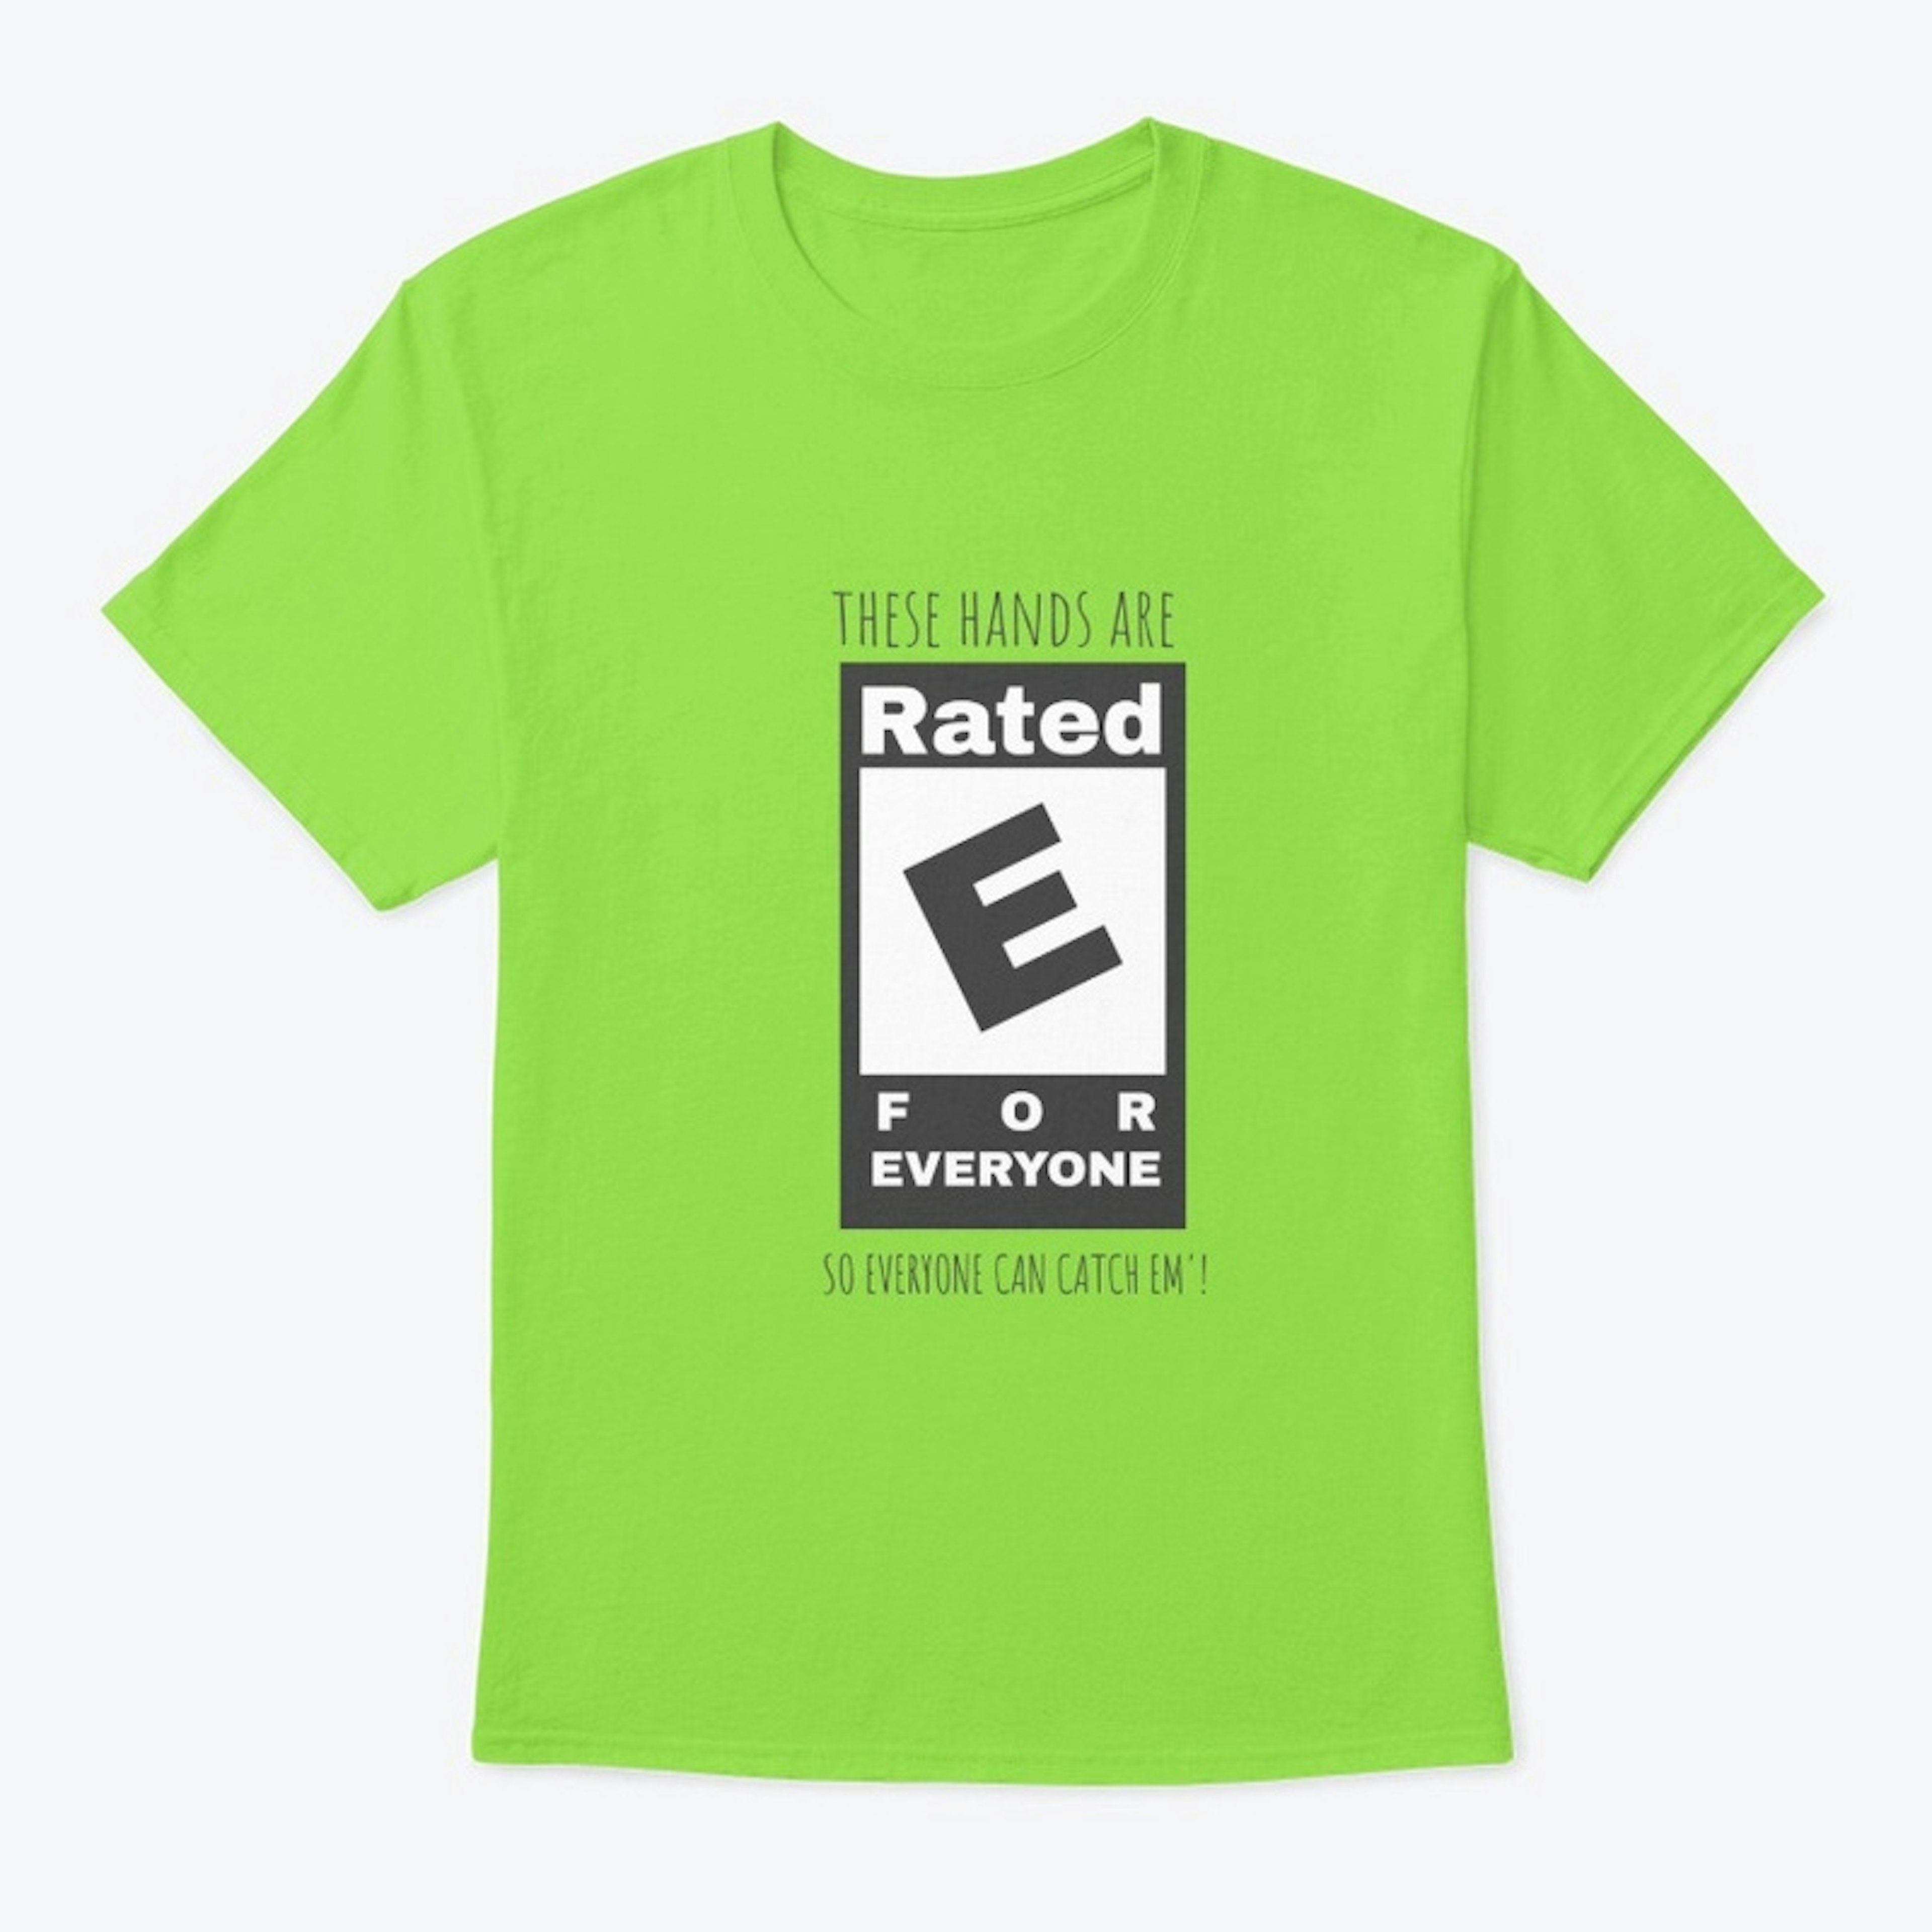 Rated E for EVERYONE